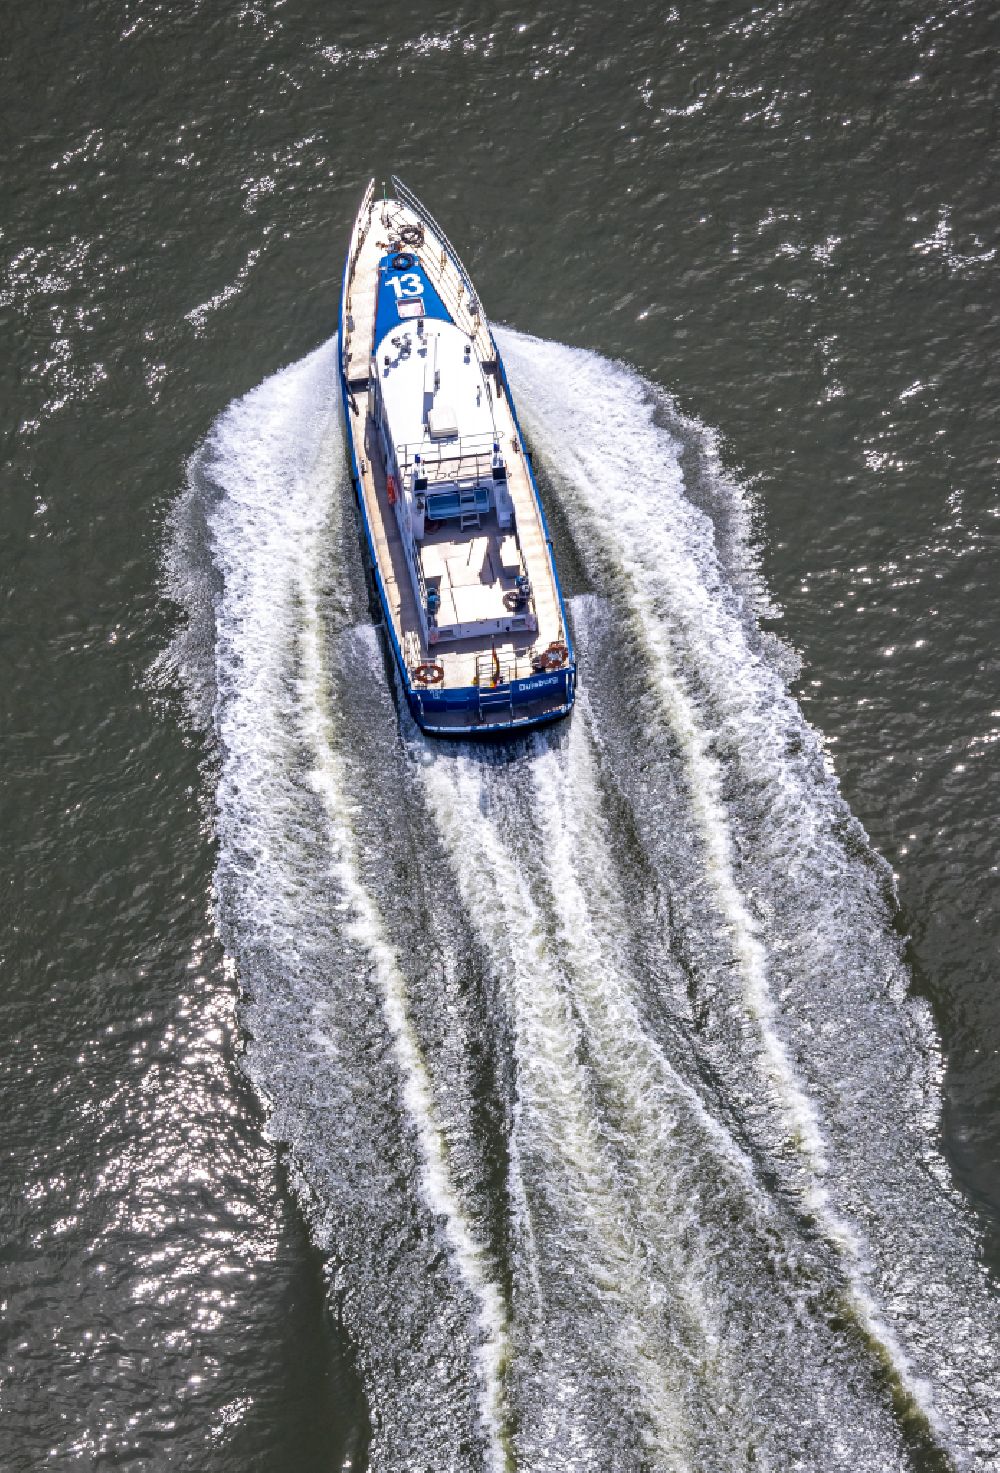 Duisburg from above - Motor boat of the water police, WSP 13, driving on the river Rhein in Duisburg in the Ruhr area in the state of North Rhine-Westphalia, Germany